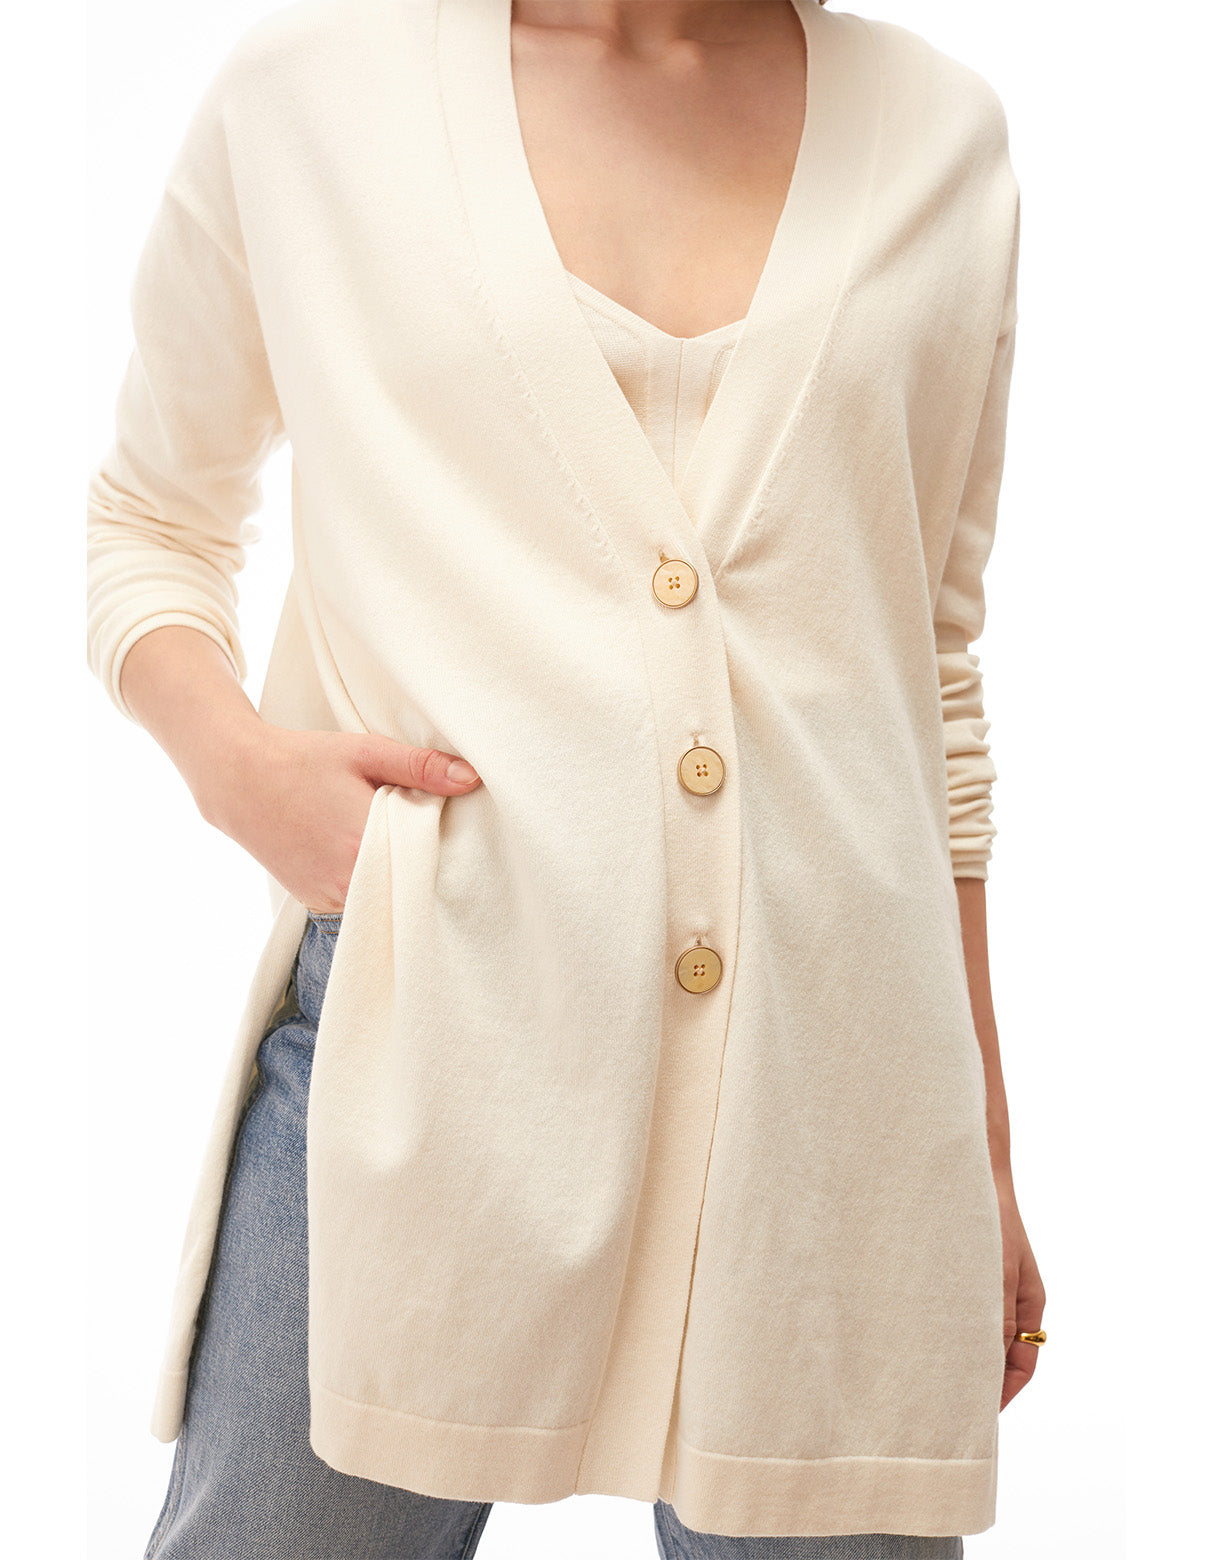 penelope travel cardi creme off white - office to date night oversized cardigan for women